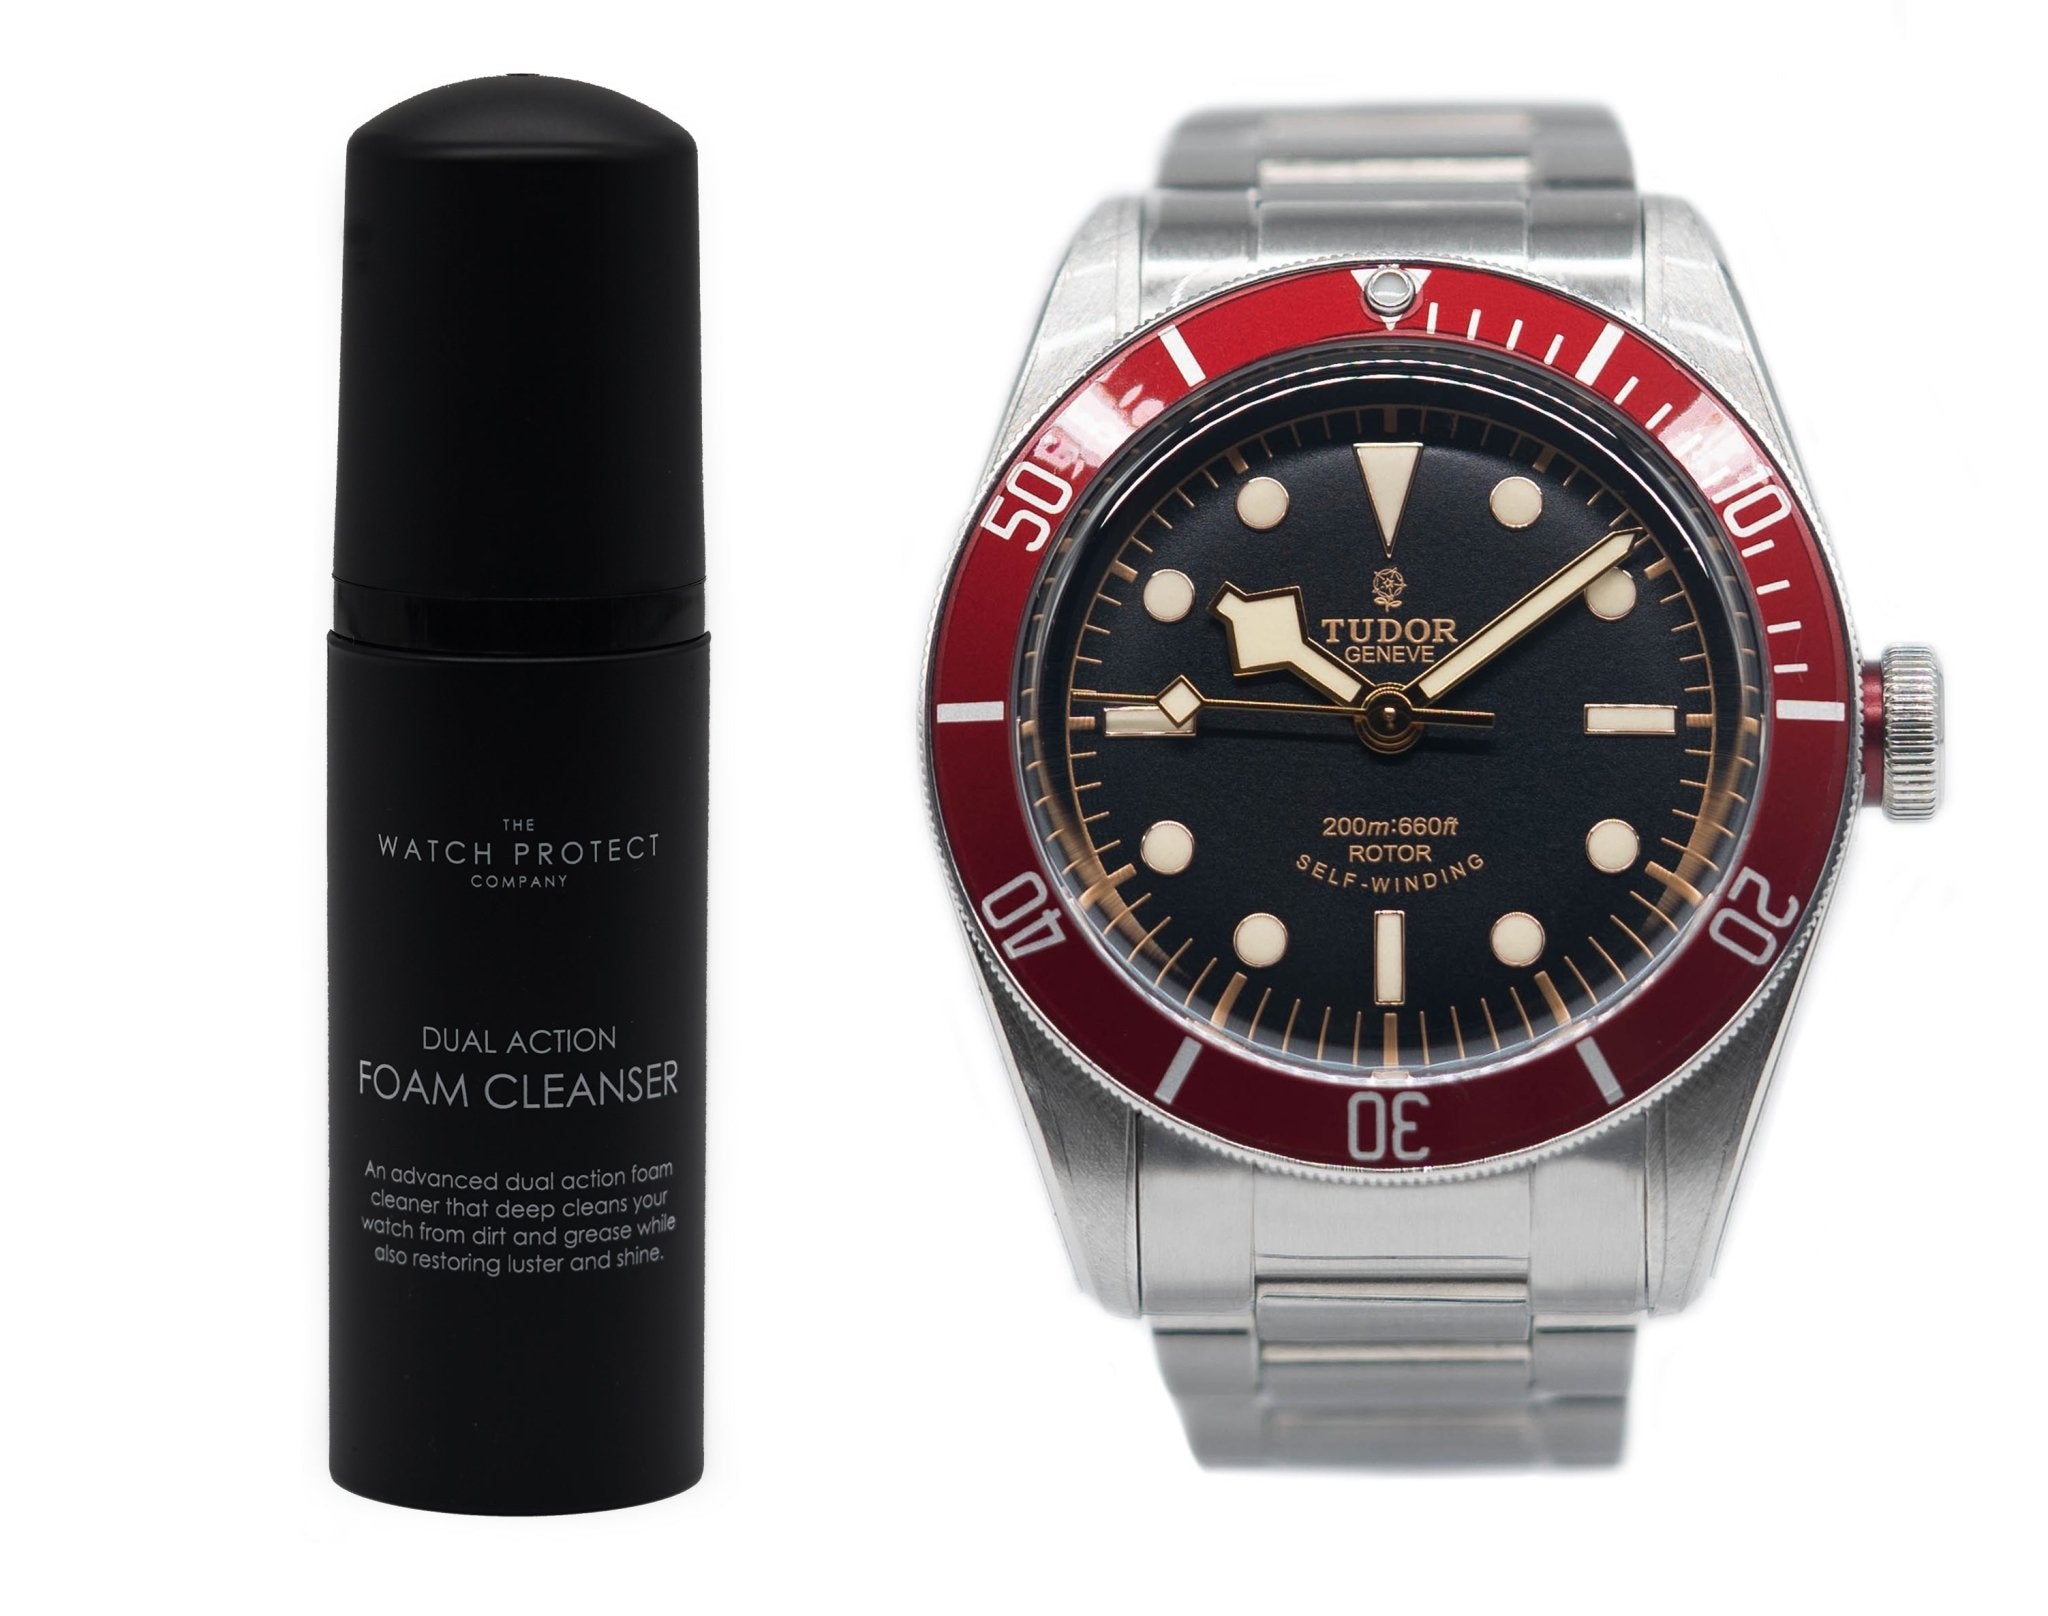 DUAL ACTION FOAM CLEANER & TUDOR BLACK BAY HERITAGE ETA 41 - TIER 3 - WATCH PROTECTION KIT BUNDLE - The Watch Protect Company